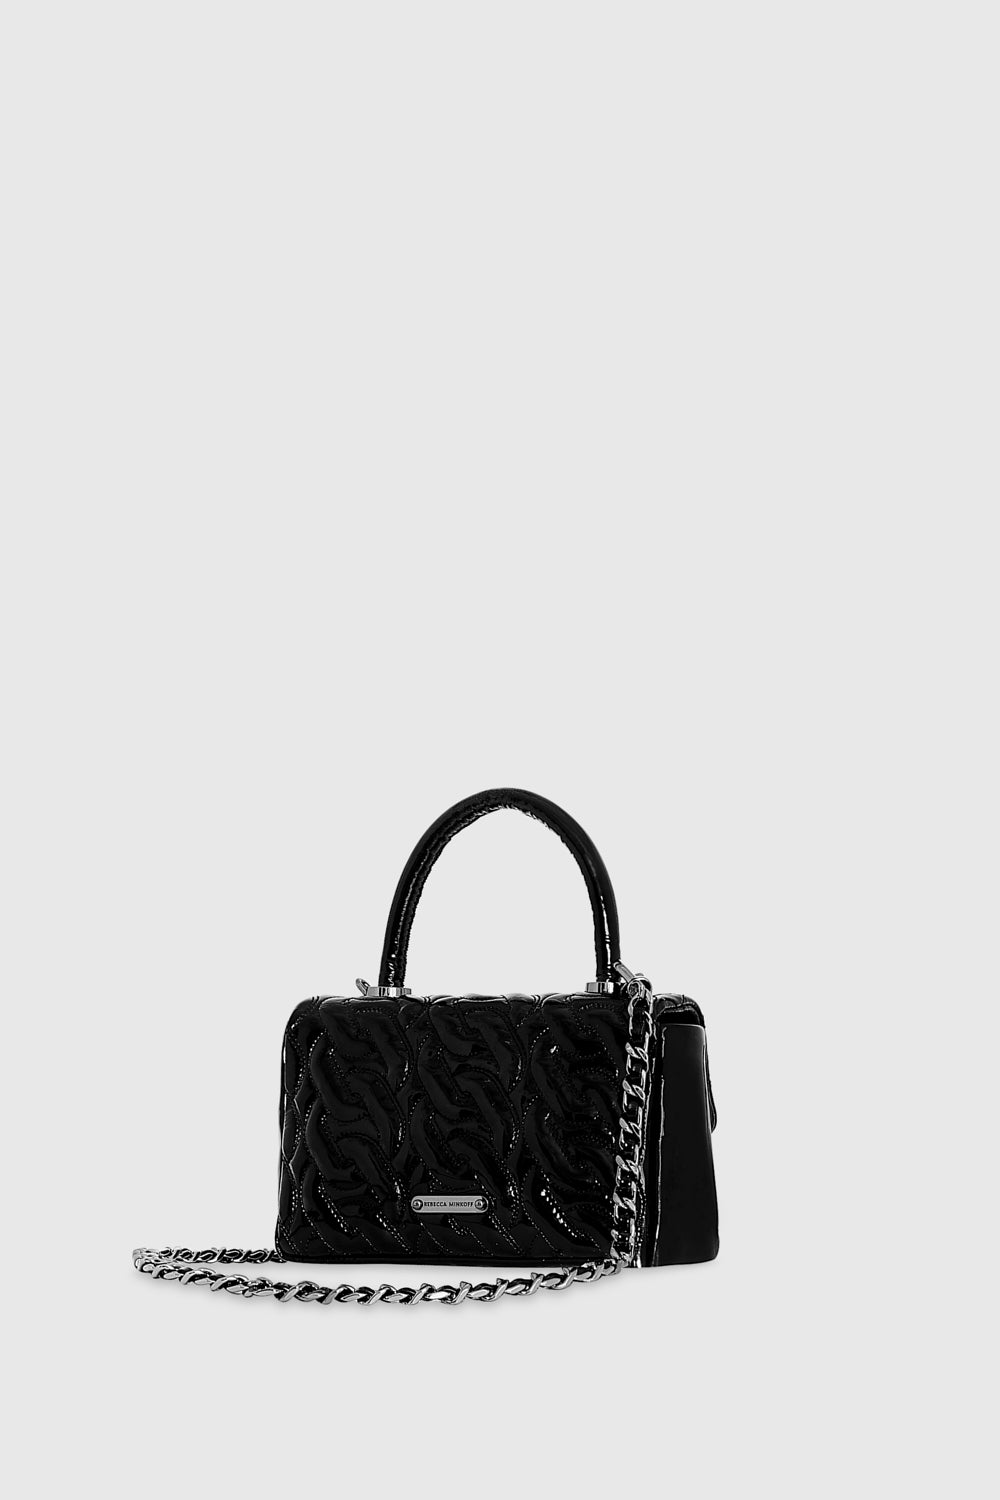 guess luxe leather bags